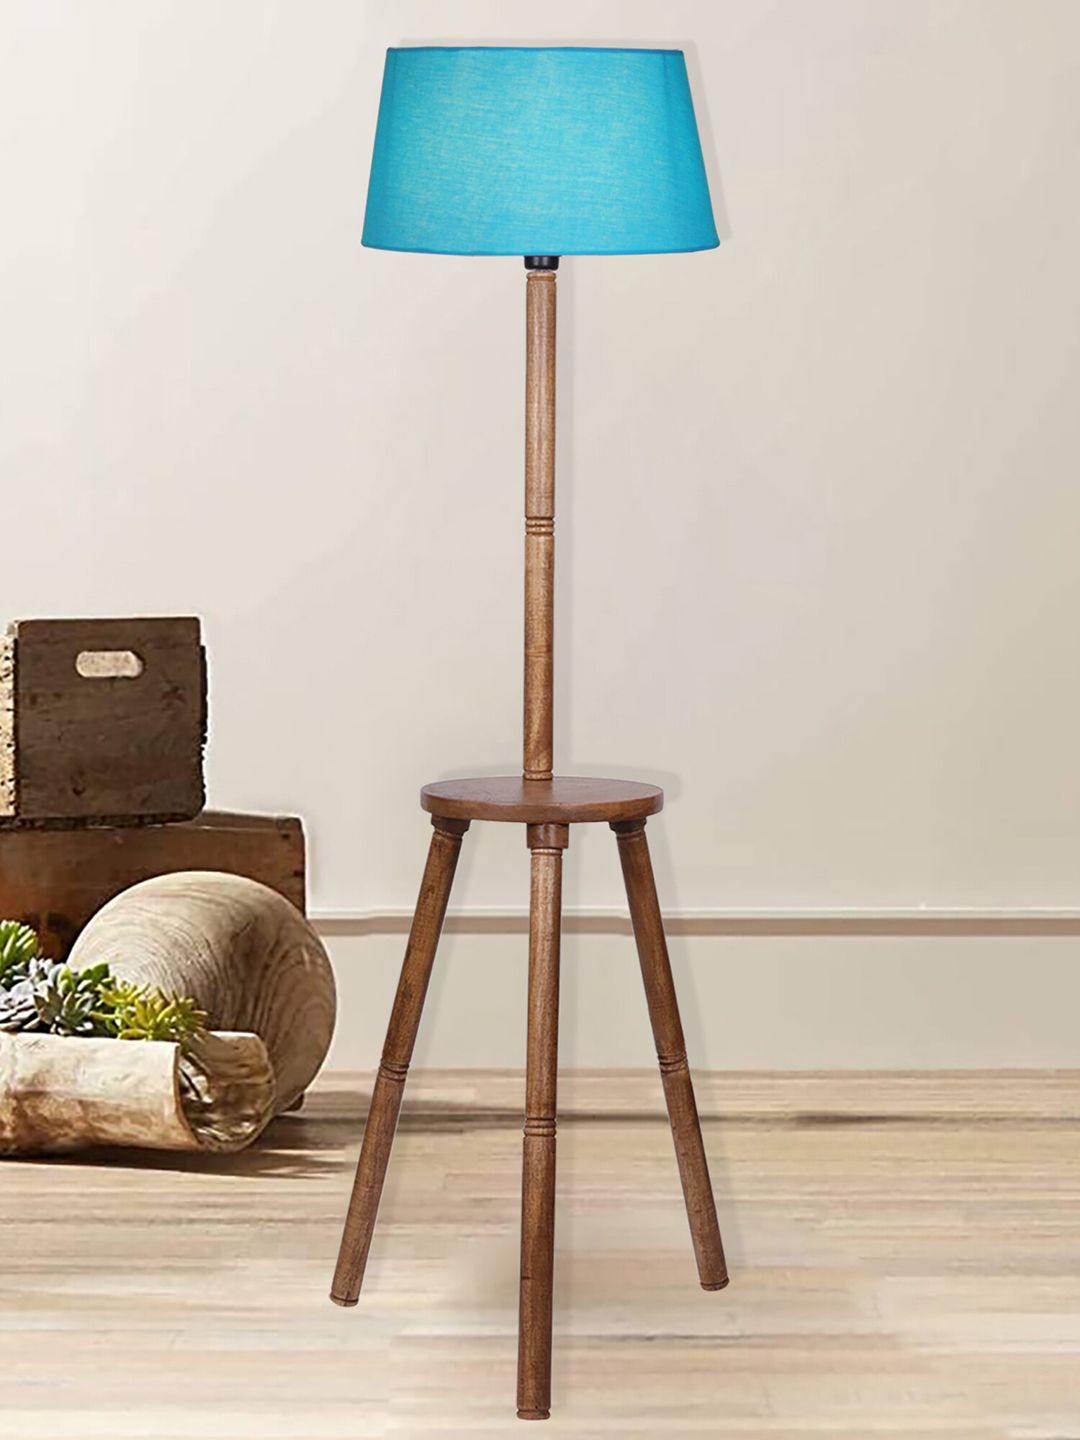 Homesake Turquoise Blue Wooden Tripod Floor Lamp With Shade Price in India